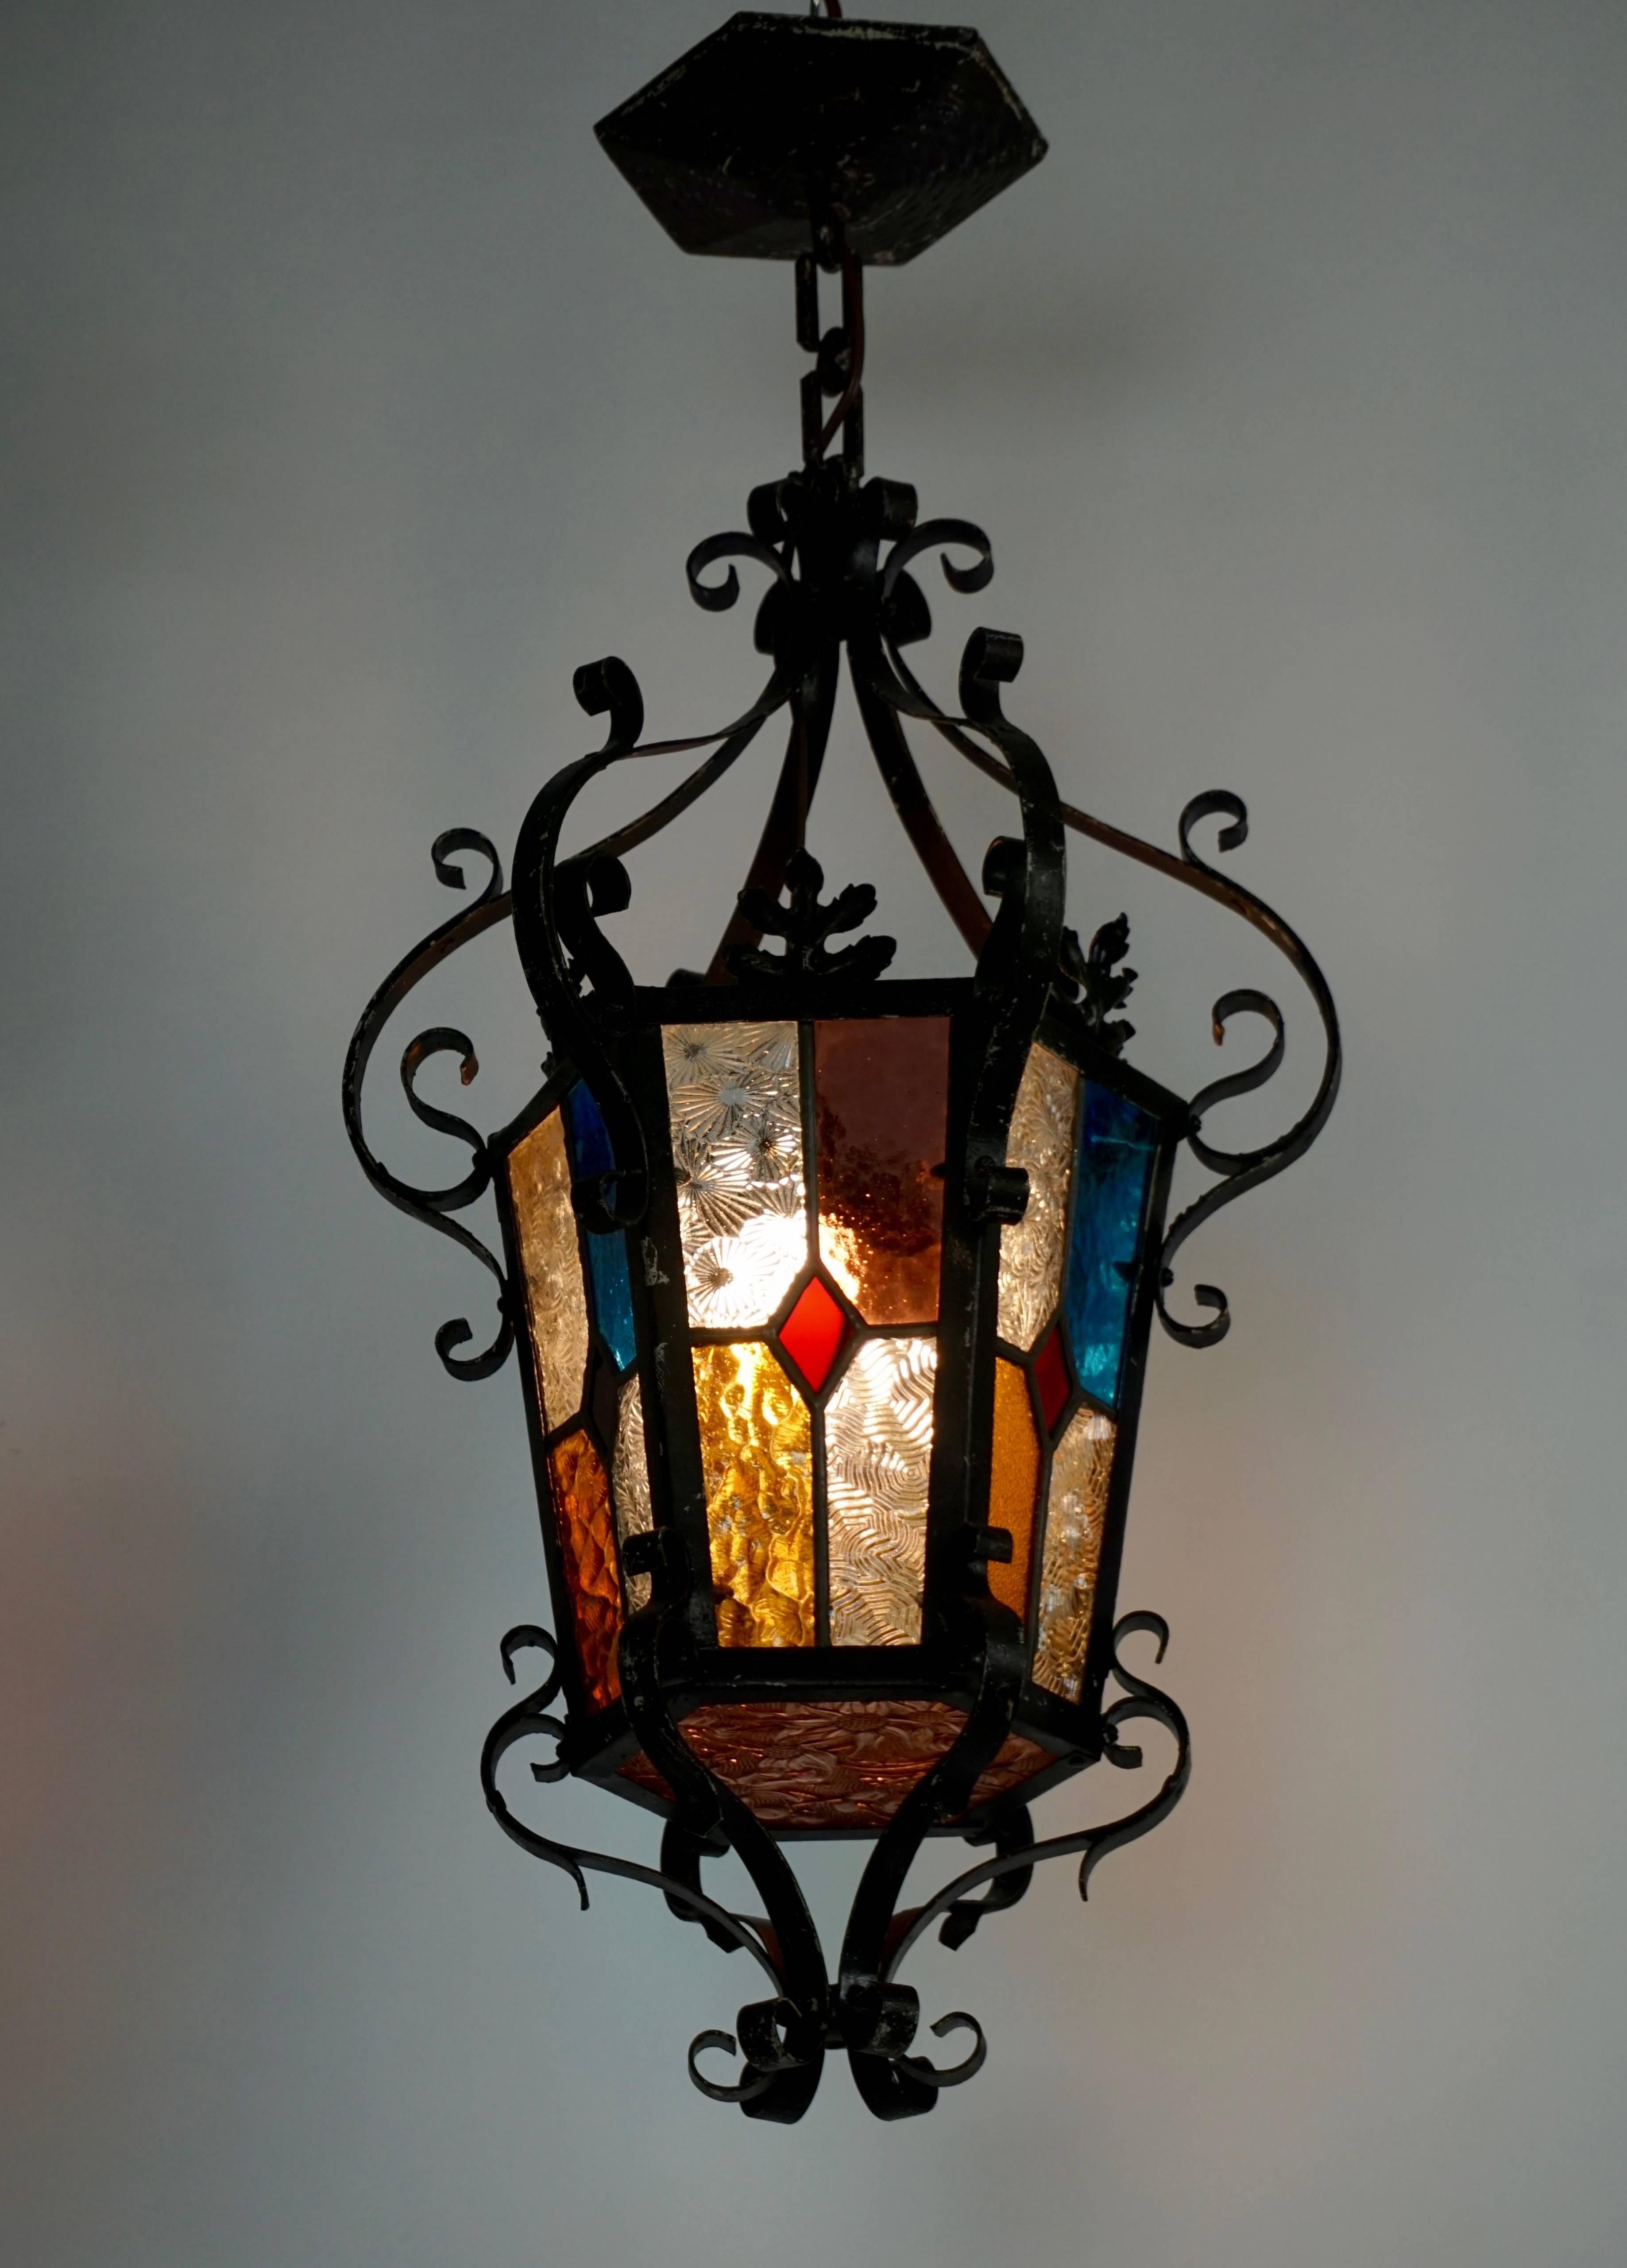 Italian wrought iron and stained glass one light hanging lantern.
Originally candle powered.
Height lantern: 60 cm.
Height with chain: 76 cm.
Diameter: 36 cm.